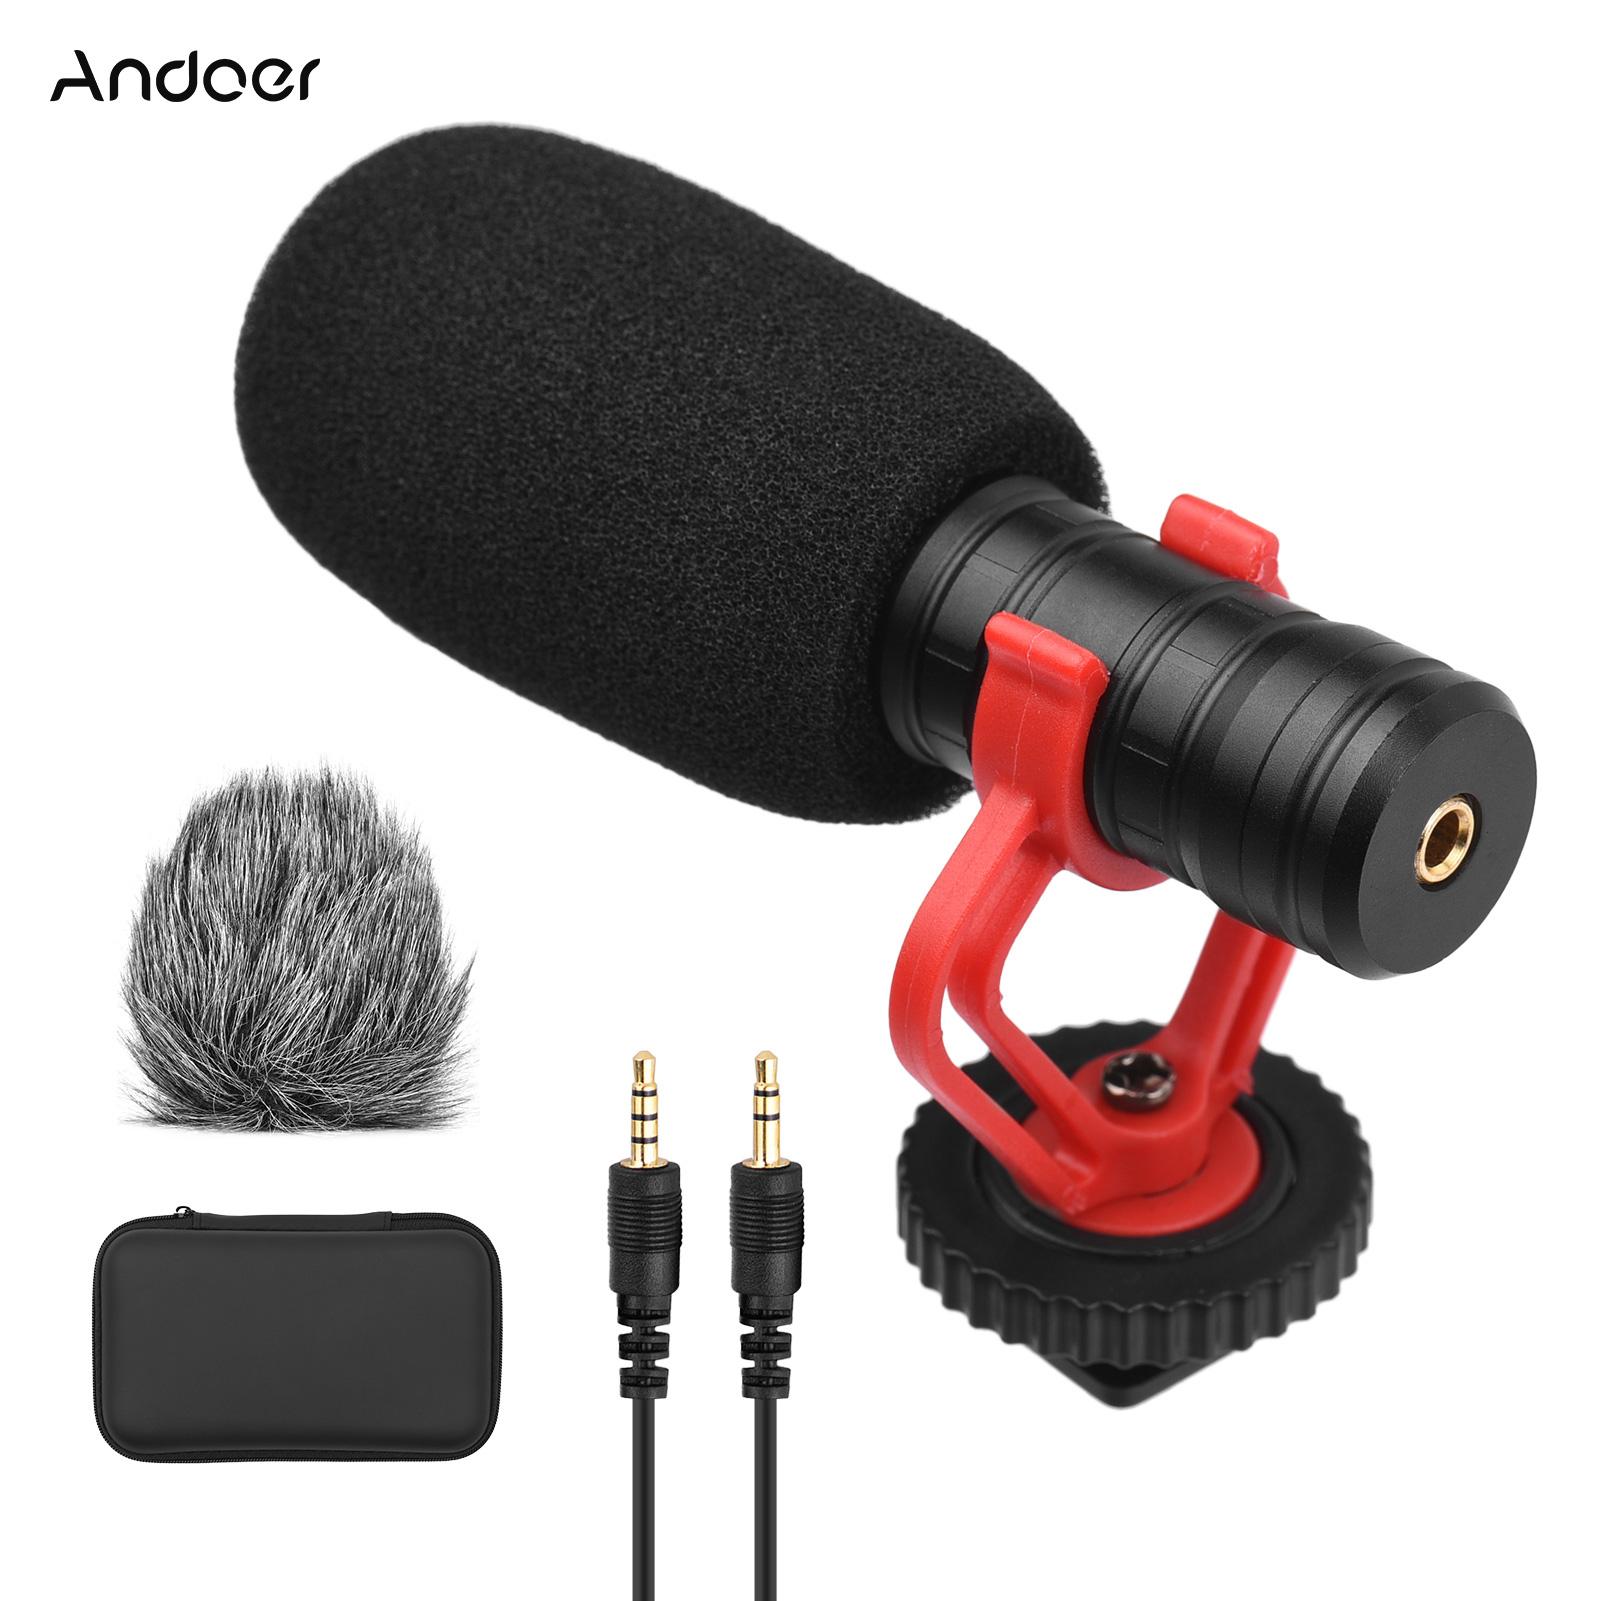 Andoer Camera Microphone Cardioid Condenser Mic with 3.5mm Port Anti-Shock Mount Sponge & Furry